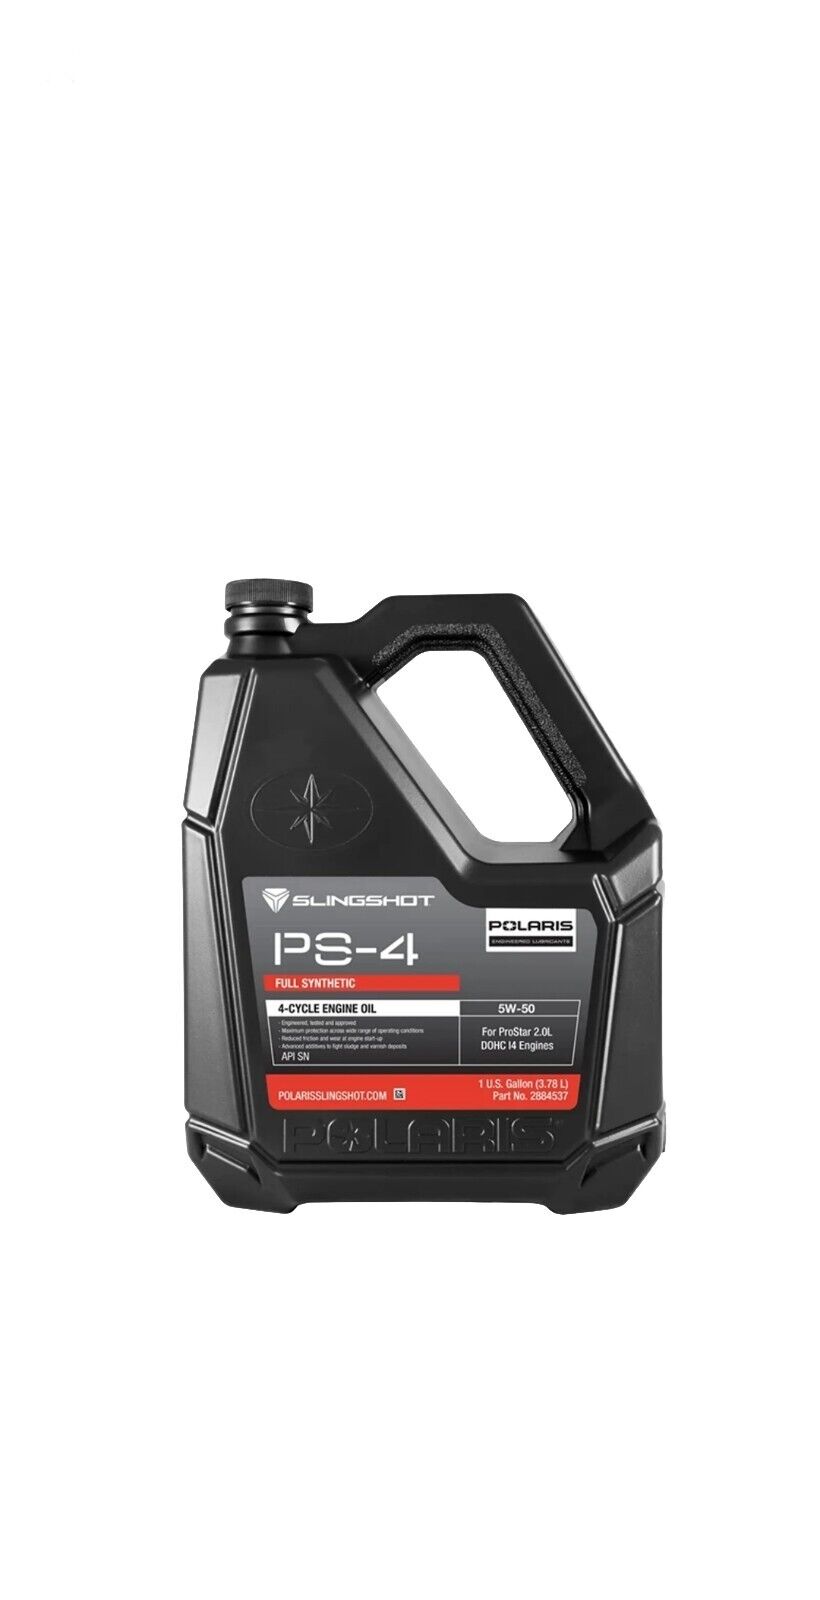 PS-4 5W-50 Full Synthetic Oil 1 Gallon 2884537 Polaris Slingshot 4-Cycle Engine